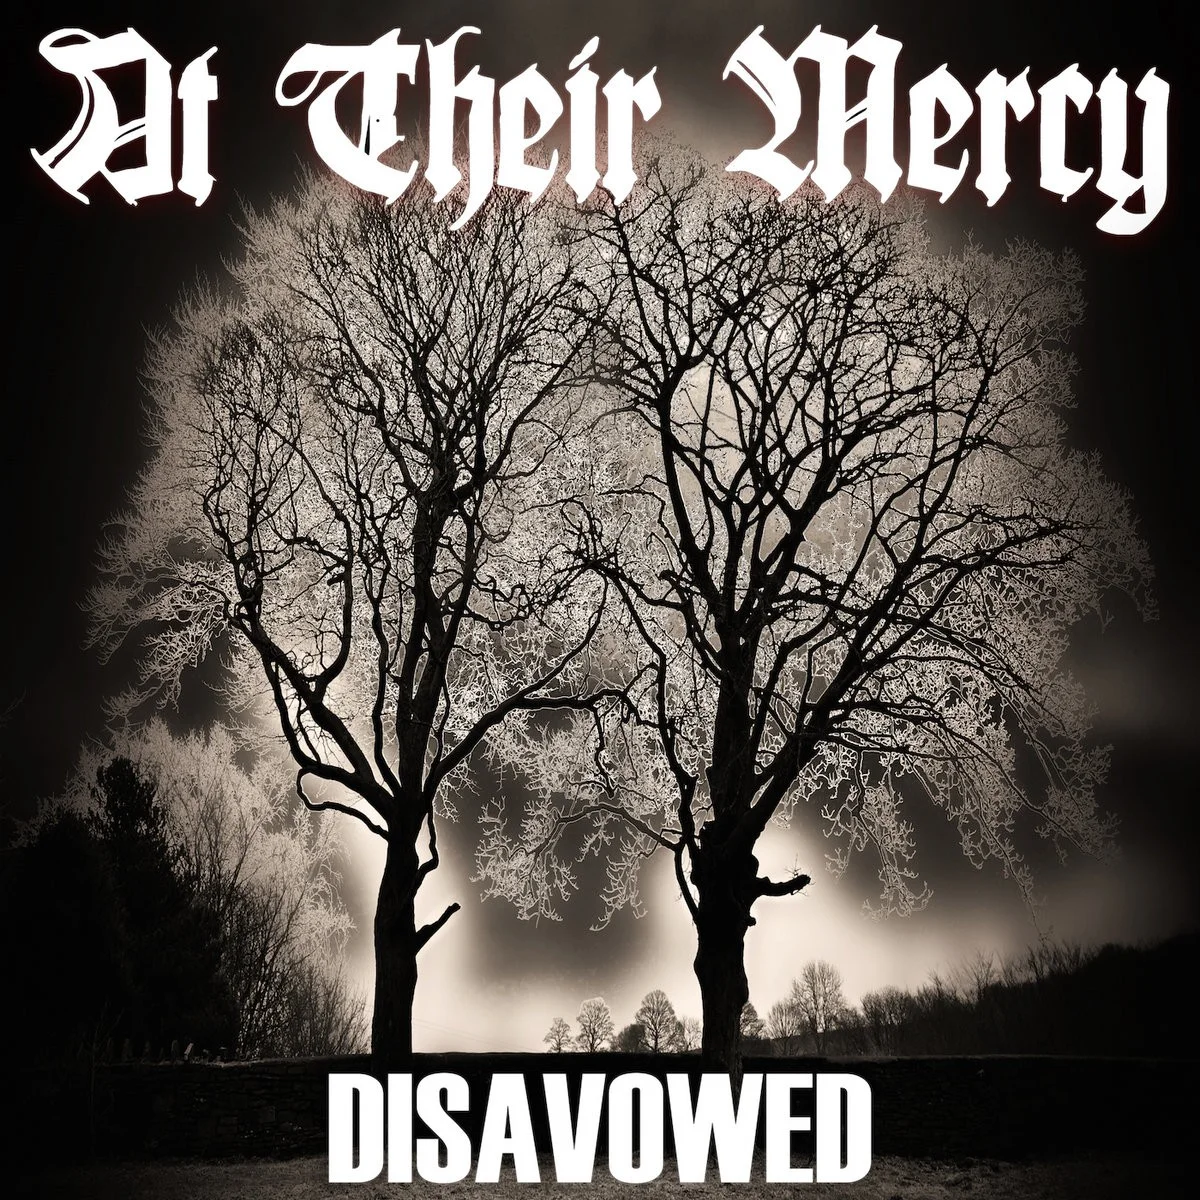 At Their Mercy Disawowved CD cover